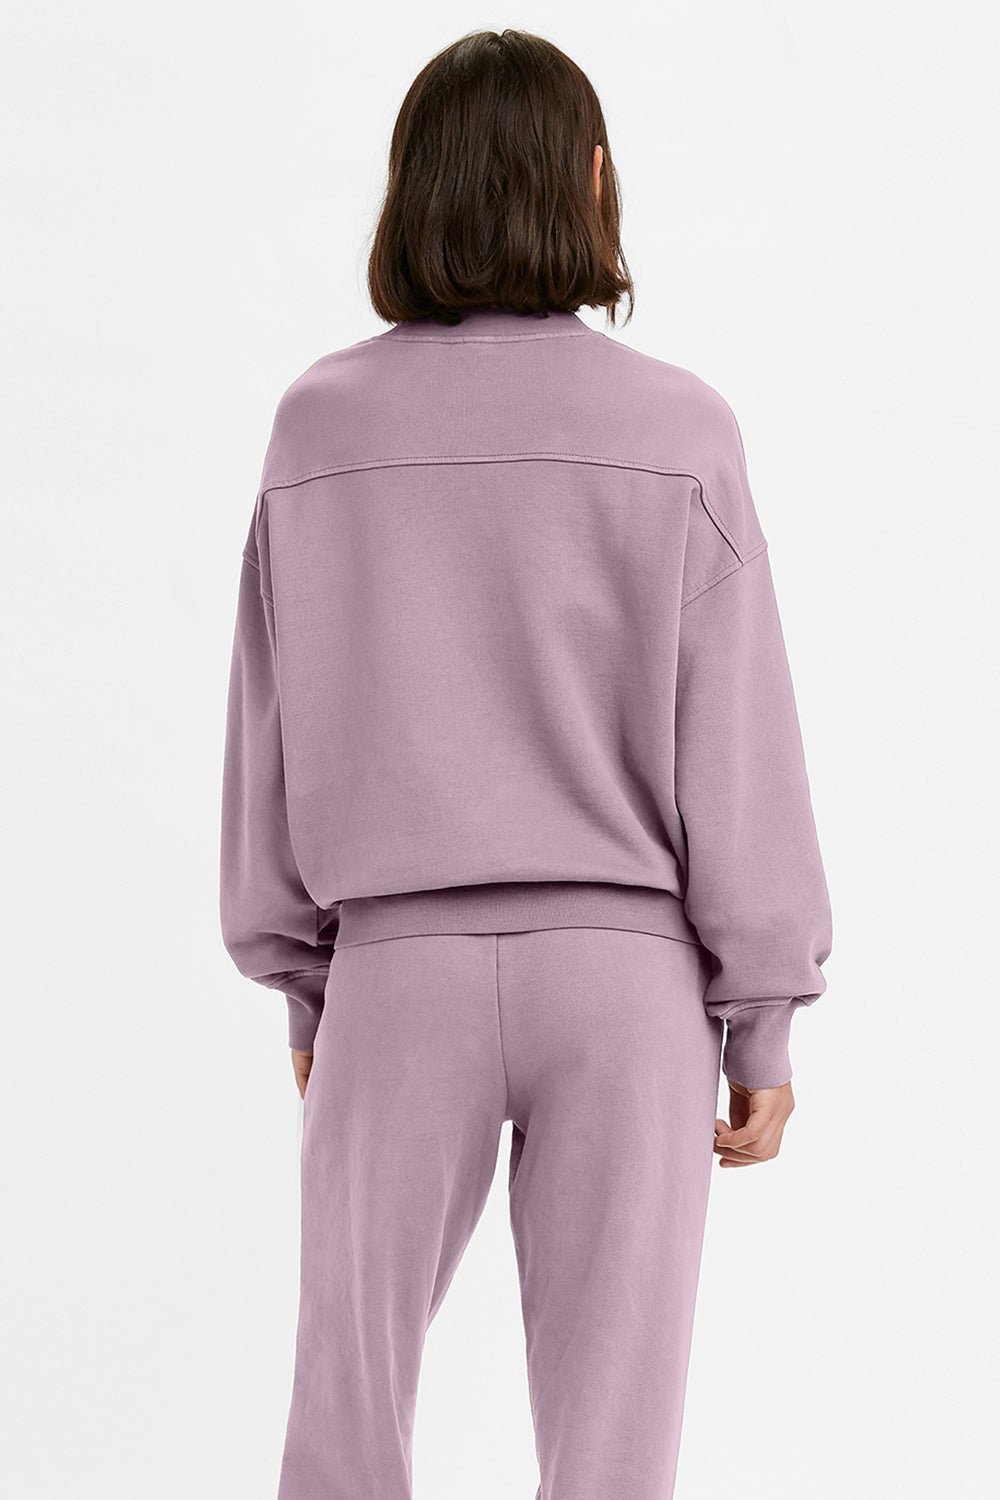 Levi's Work From Home Sweatshirt Winsome Orchid